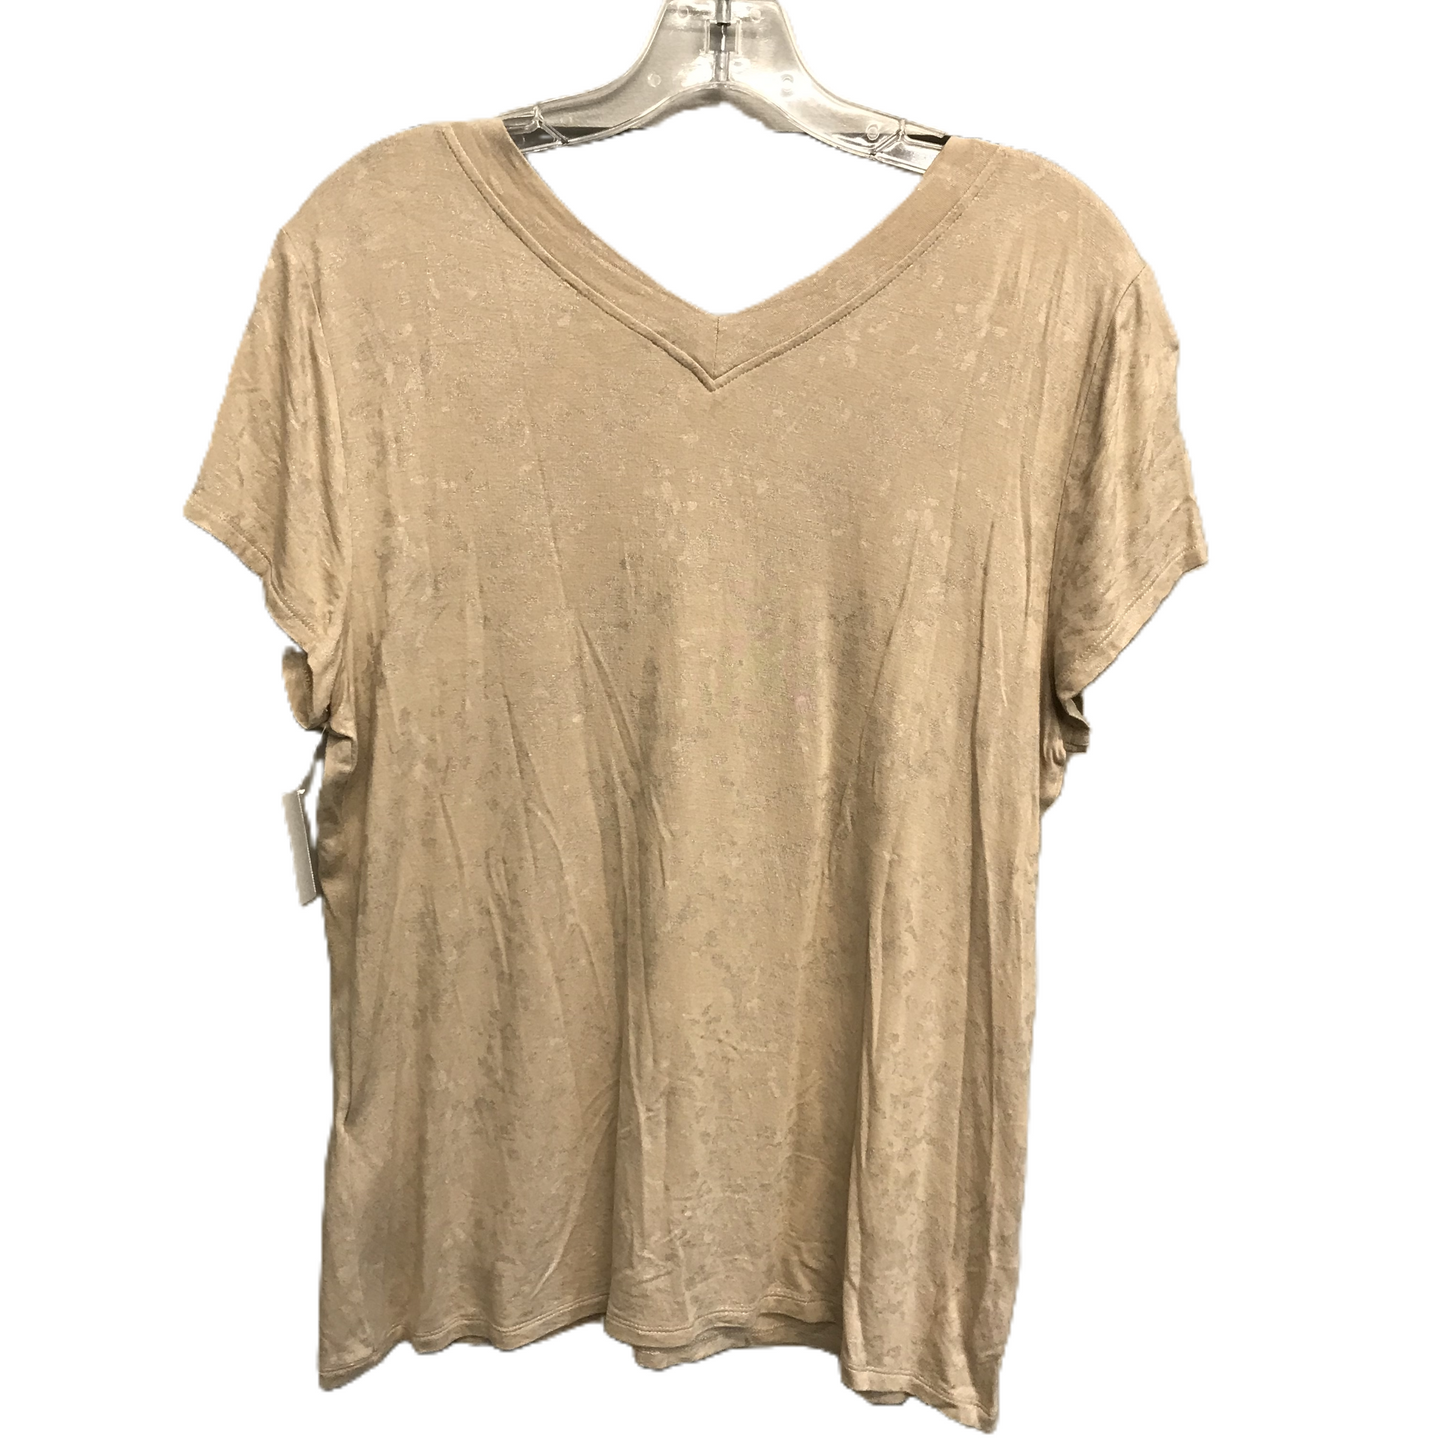 Tan Top Short Sleeve By White House Black Market, Size: L